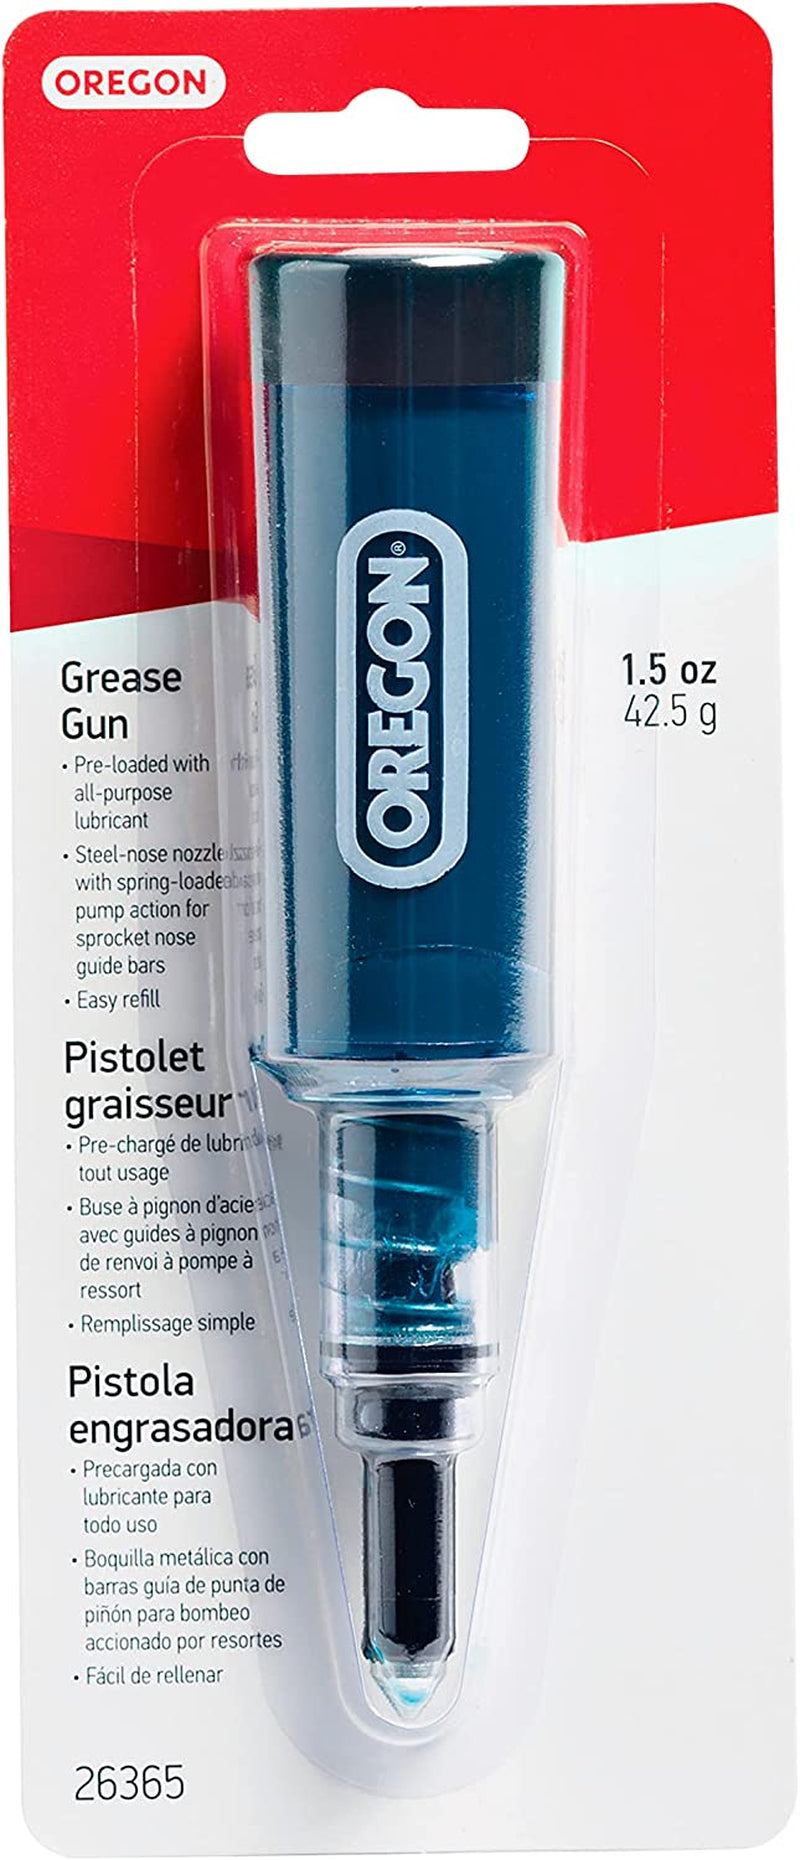 Oregon Grease Gun for Chainsaws, Pre Loaded All Purpose Lubricant, Easy Refill, Universal for Most Makes/Models of Saw Chains and Cutters (26365)